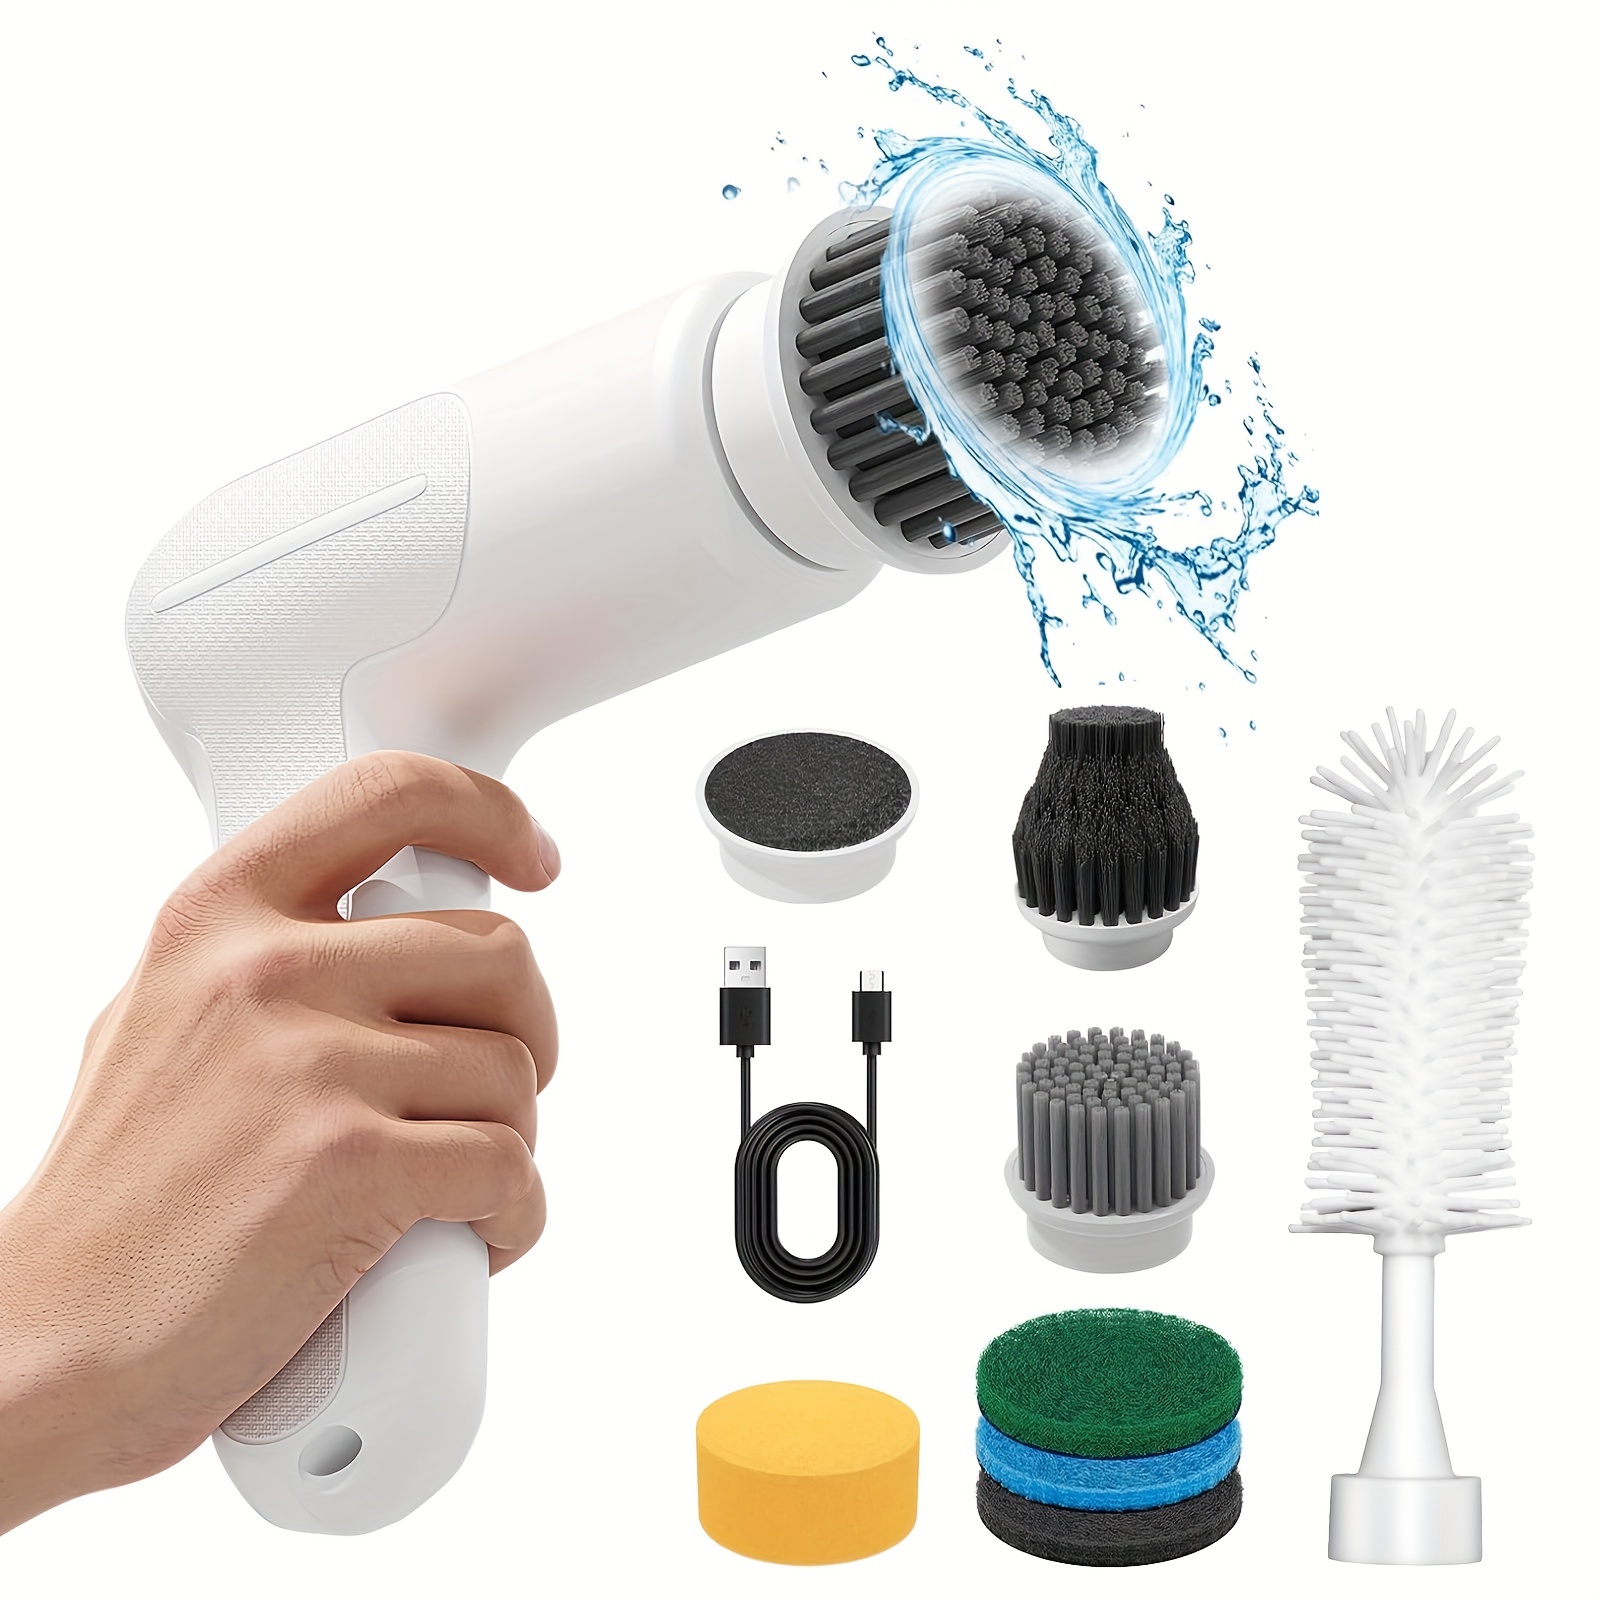 

Electric Kitchen Cleaning Brush, Handheld Electric Spin Scrubber Cordless Tub And Tile Scrubber With 8 Replaceable Brushes Heads, 2 Speeds For Bathroom/sinks, White